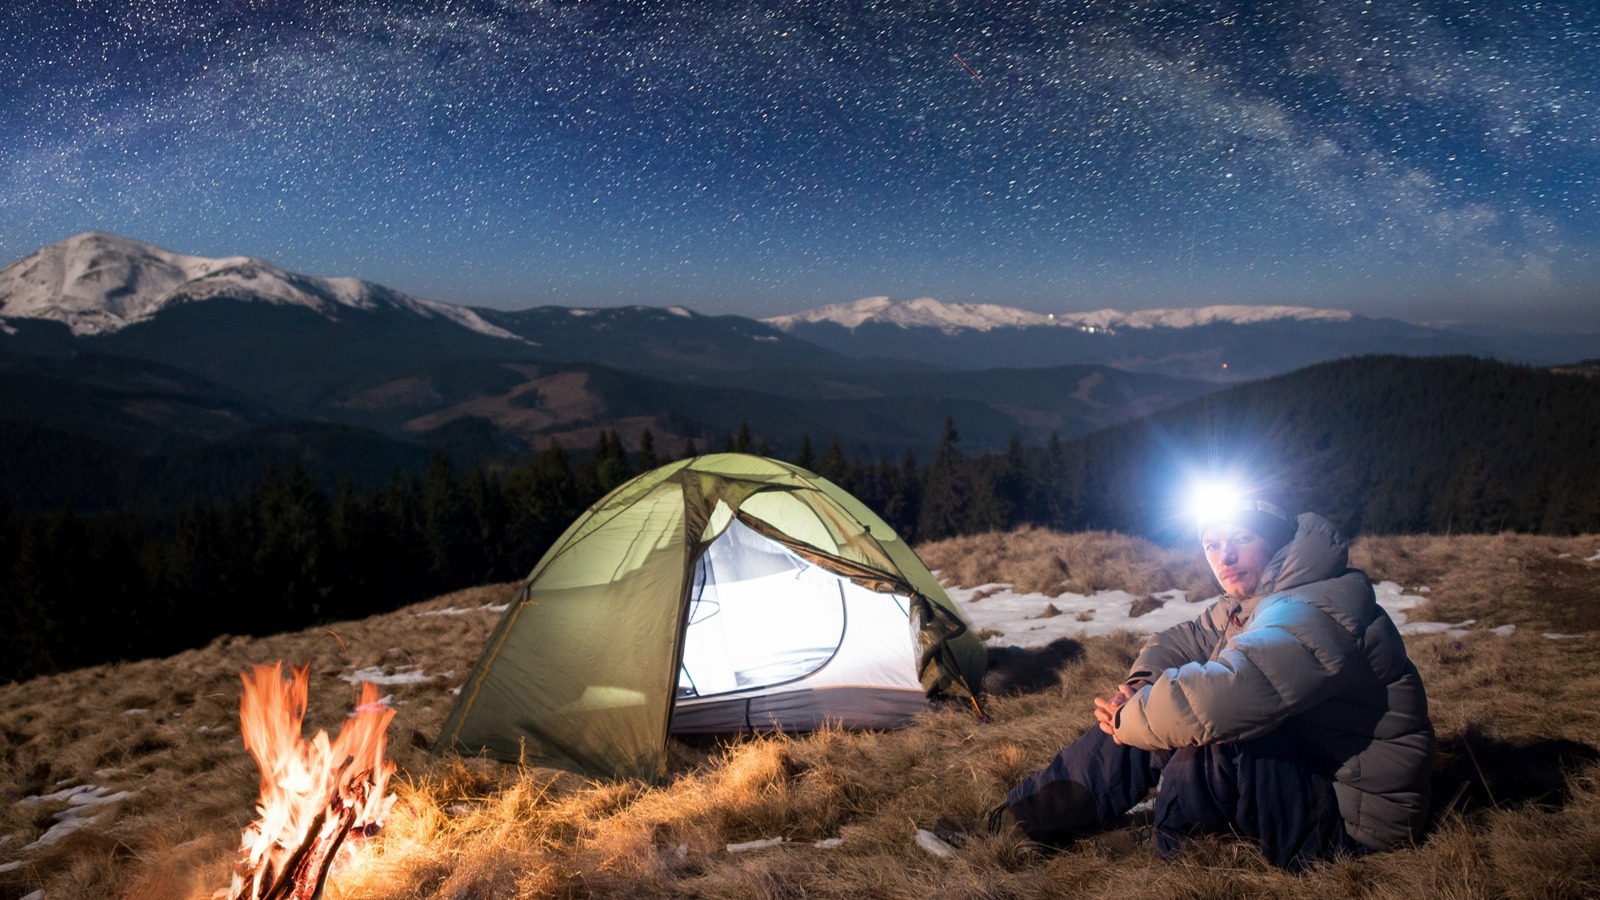 5 Of The Best Headlamps To Consider For Your Next Camping Trip